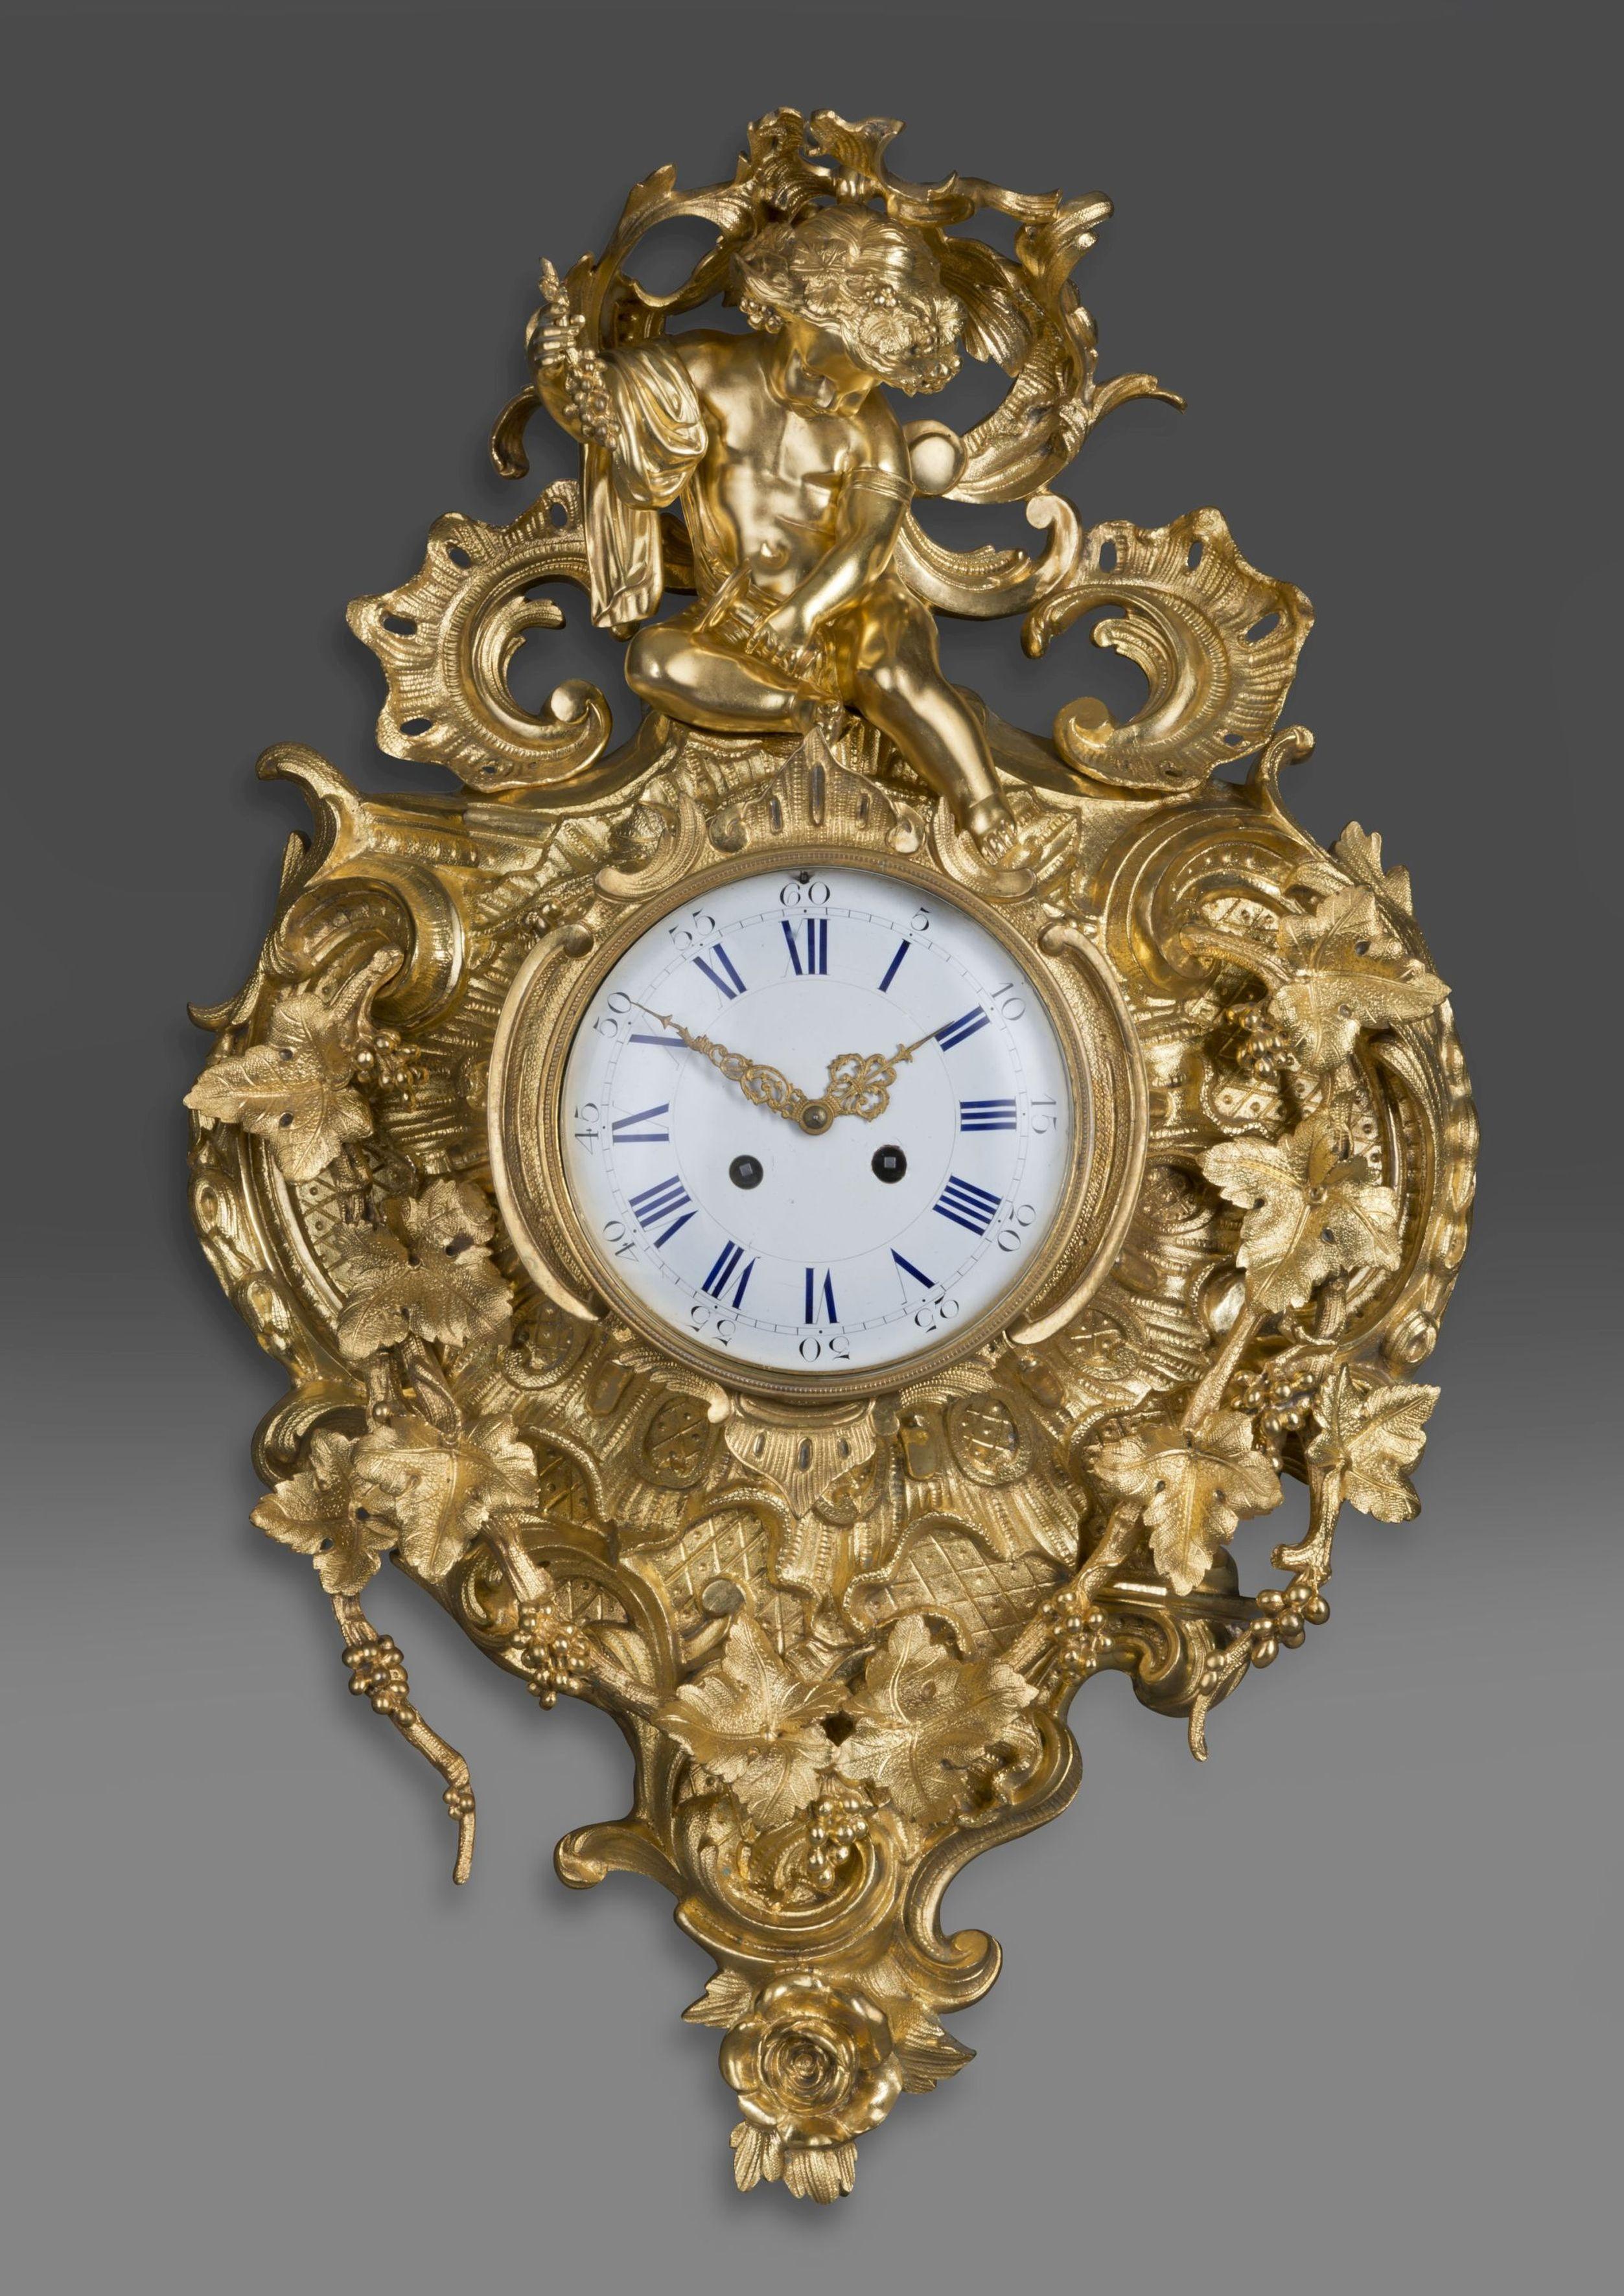 An elaborate Louis XV style gilt-bronze cartel clock.

French, circa 1890. 

Surmounted by a Bacchanalian figure, this elaborately cast cartel clock has a white enamel circular dial with Roman and Arabic numerals and gilt hands. The case cast